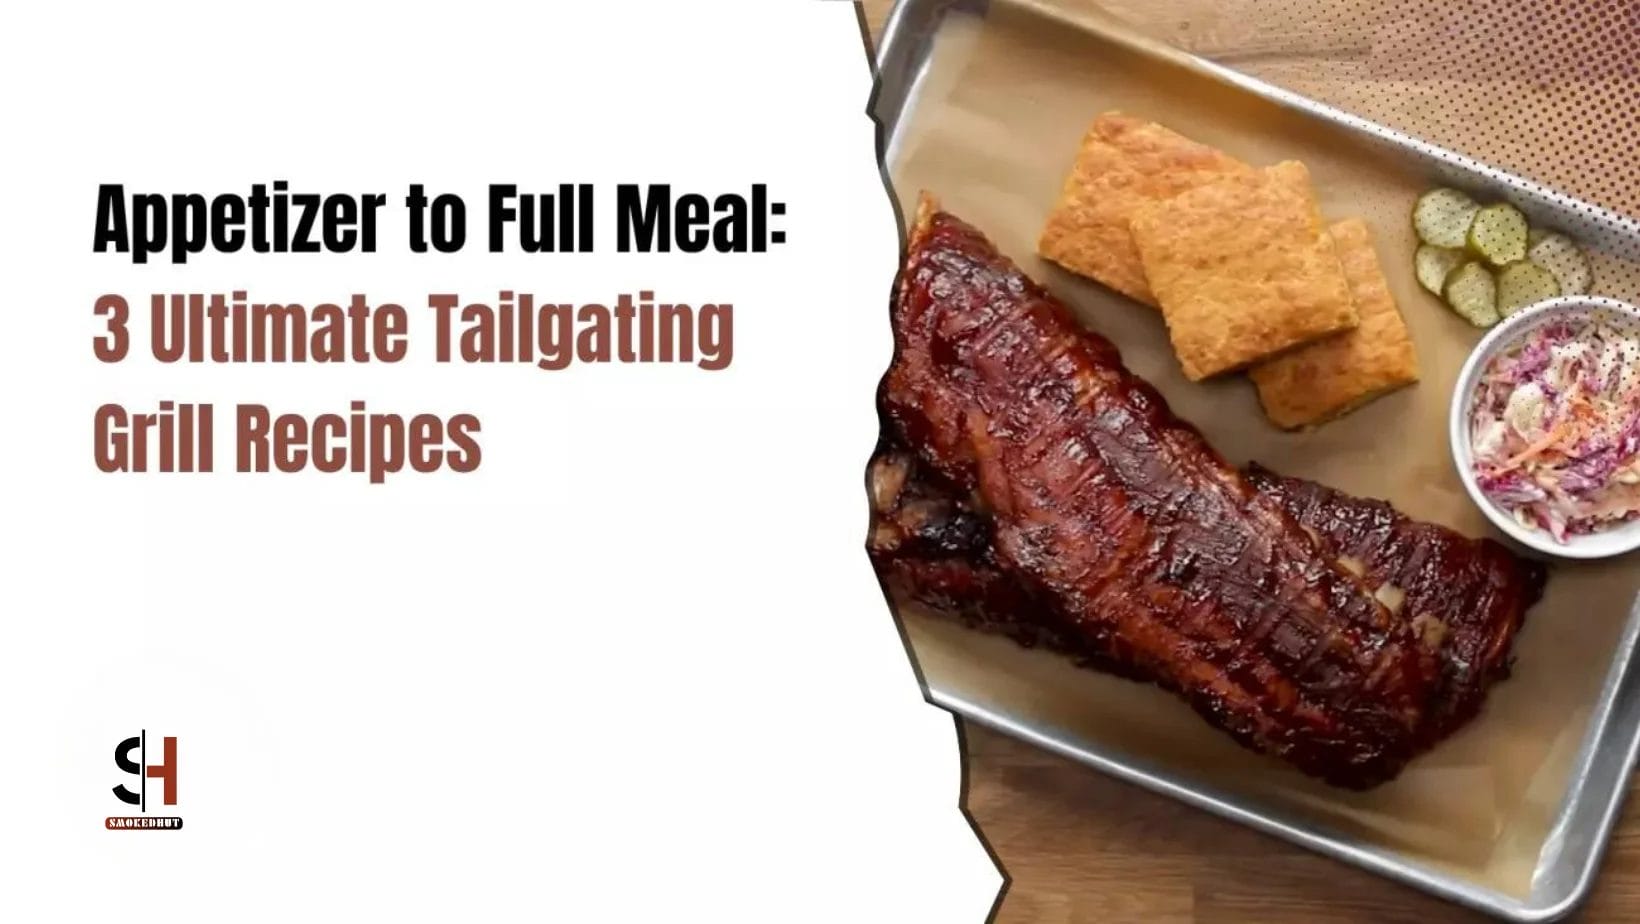 Appetizer to Full Meal 3 Ultimate Tailgate Grill Recipes